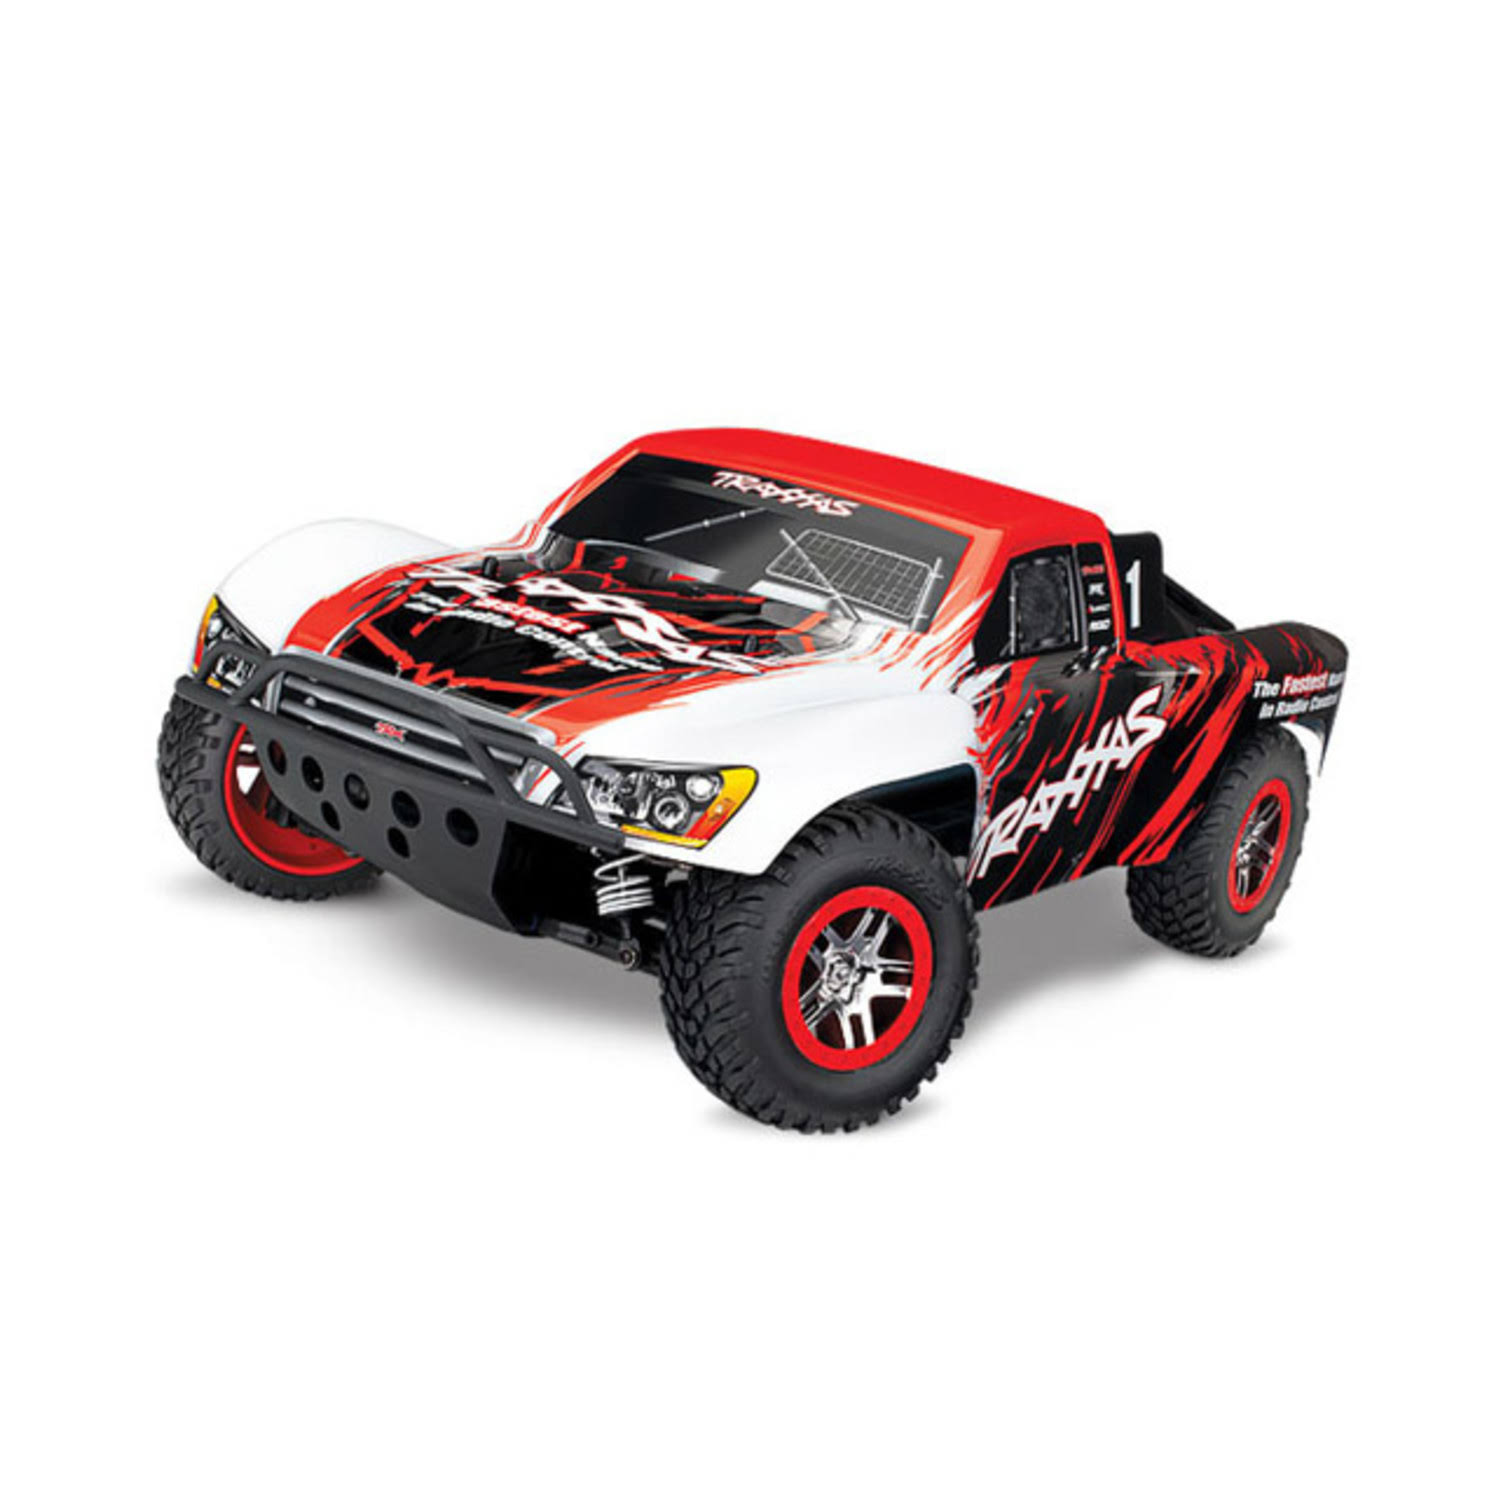 Traxxas Slash 4x4 VXL 1/10 Scale 4WD Brushless Short-Course Truck, Red